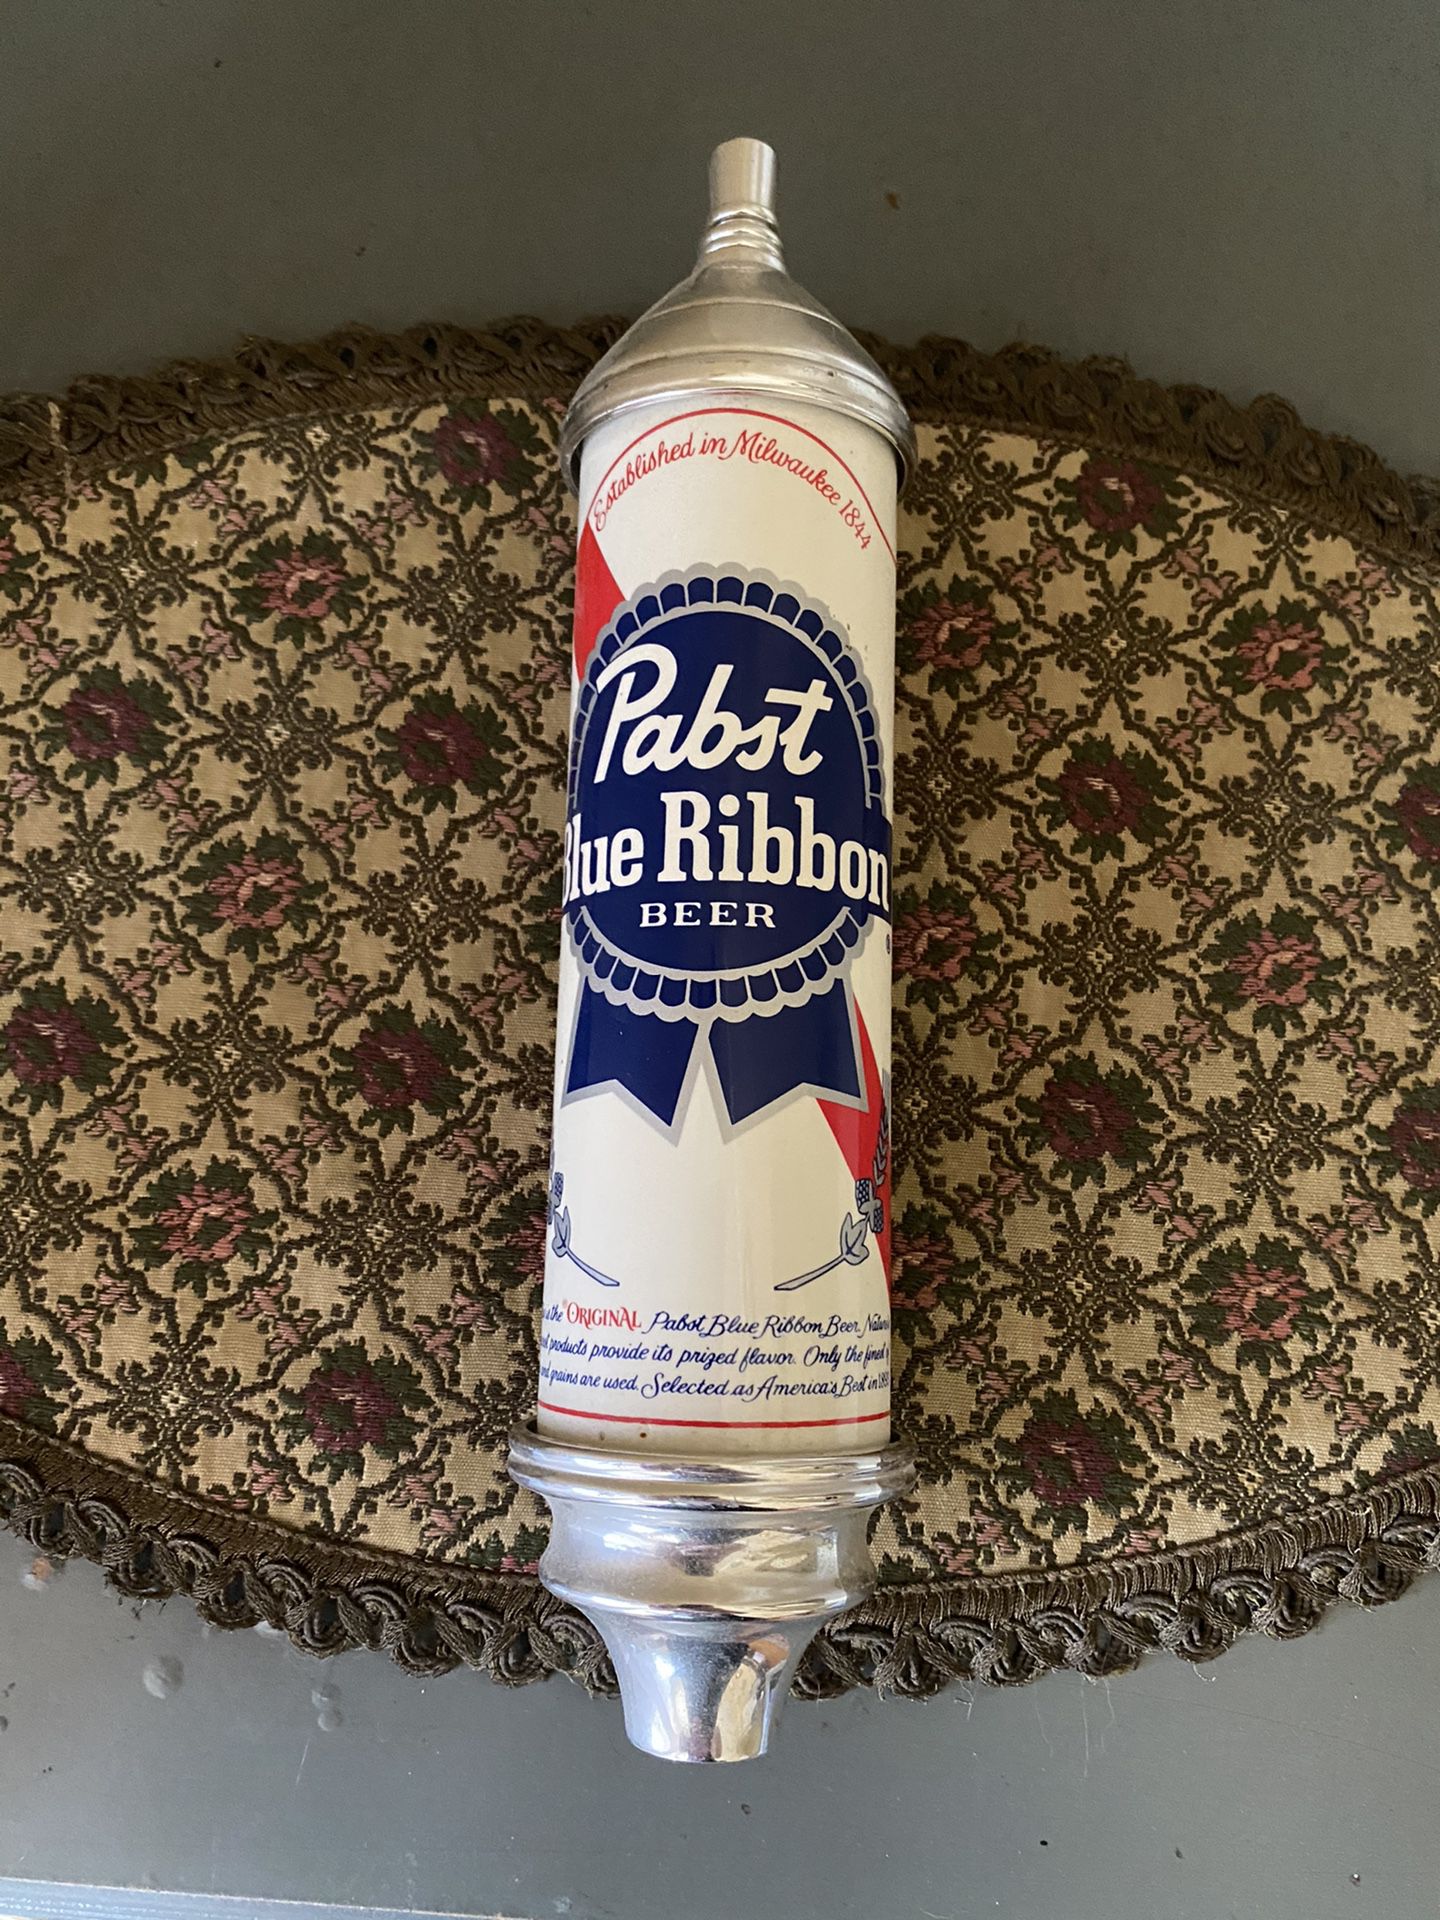 Pabst Blue Ribbon beer 🍺 tap handle.